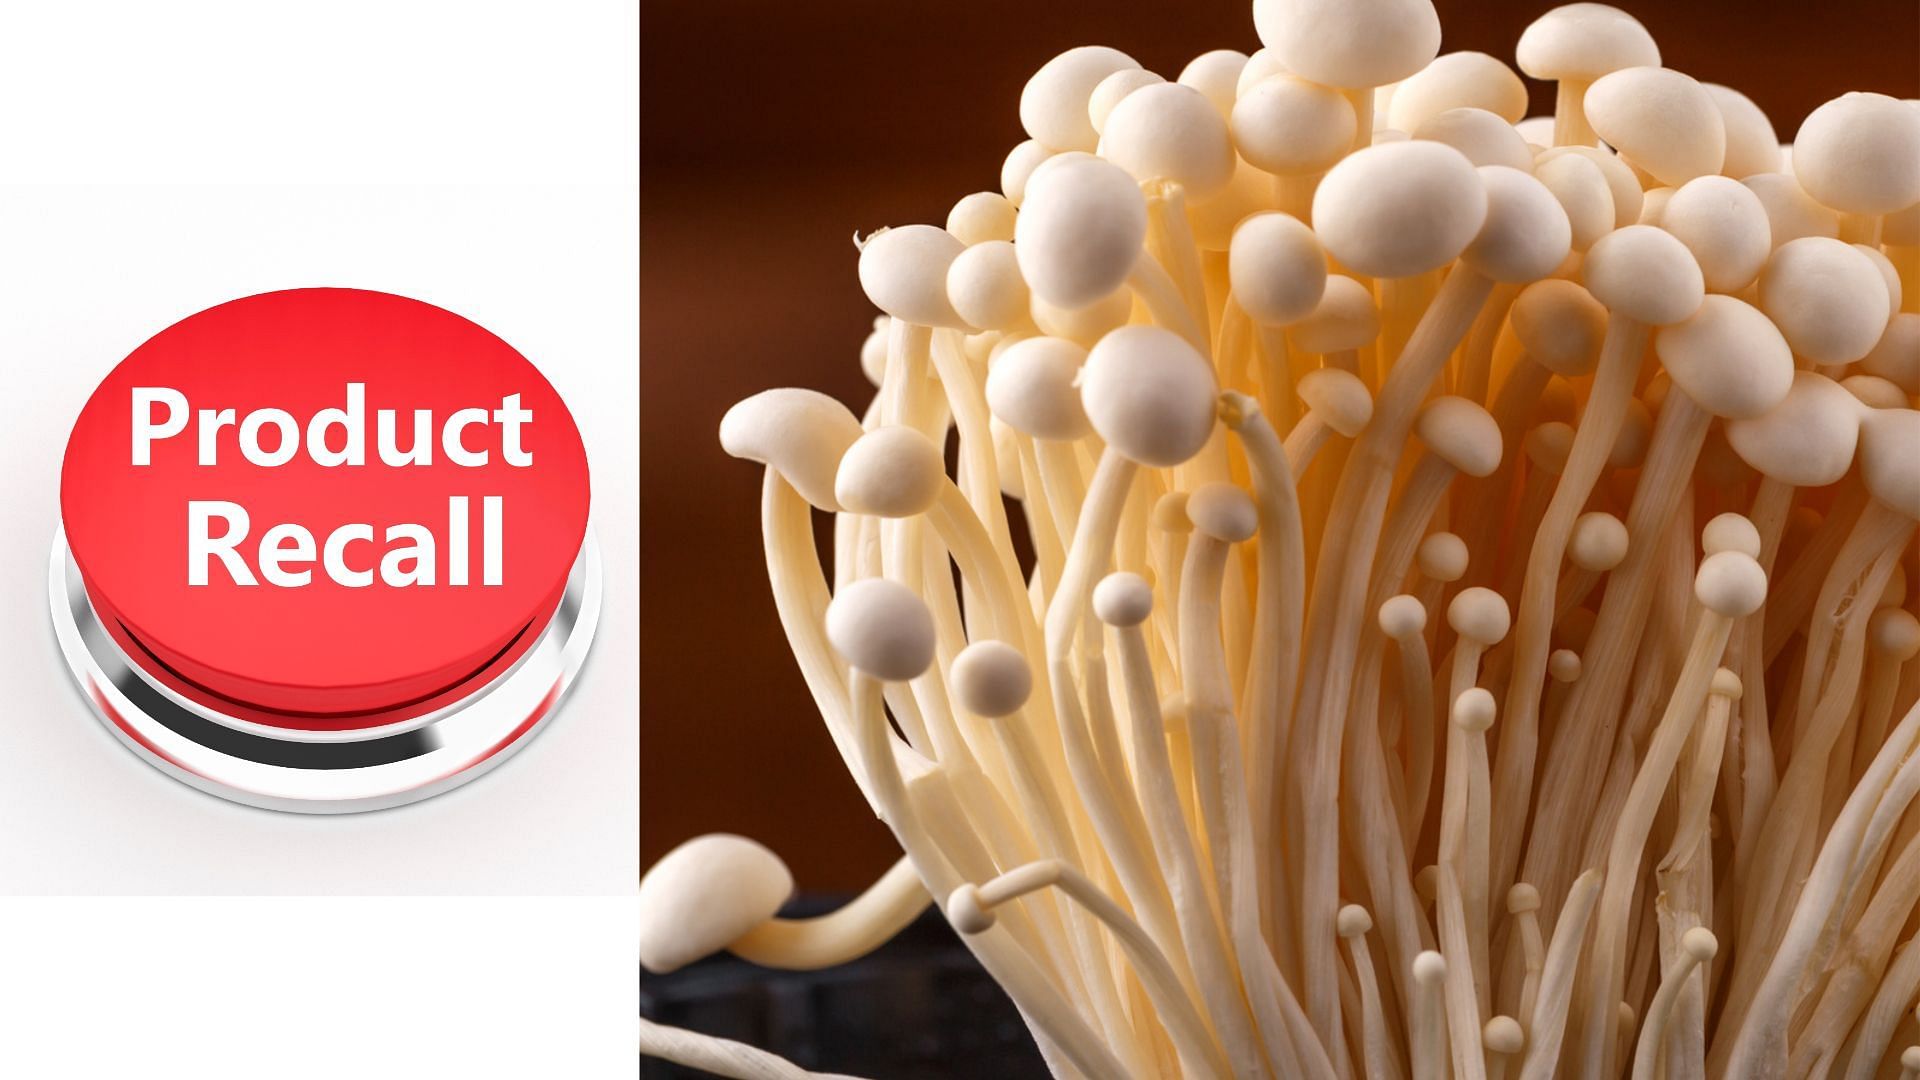 Jan Fruits Inc. has issued a nationwide recall of ENOKI MUSHROOM over concerns about potential contamination with Listeria monocytogenes (Image via Tamakhin Mykhailo/Shutterstock)